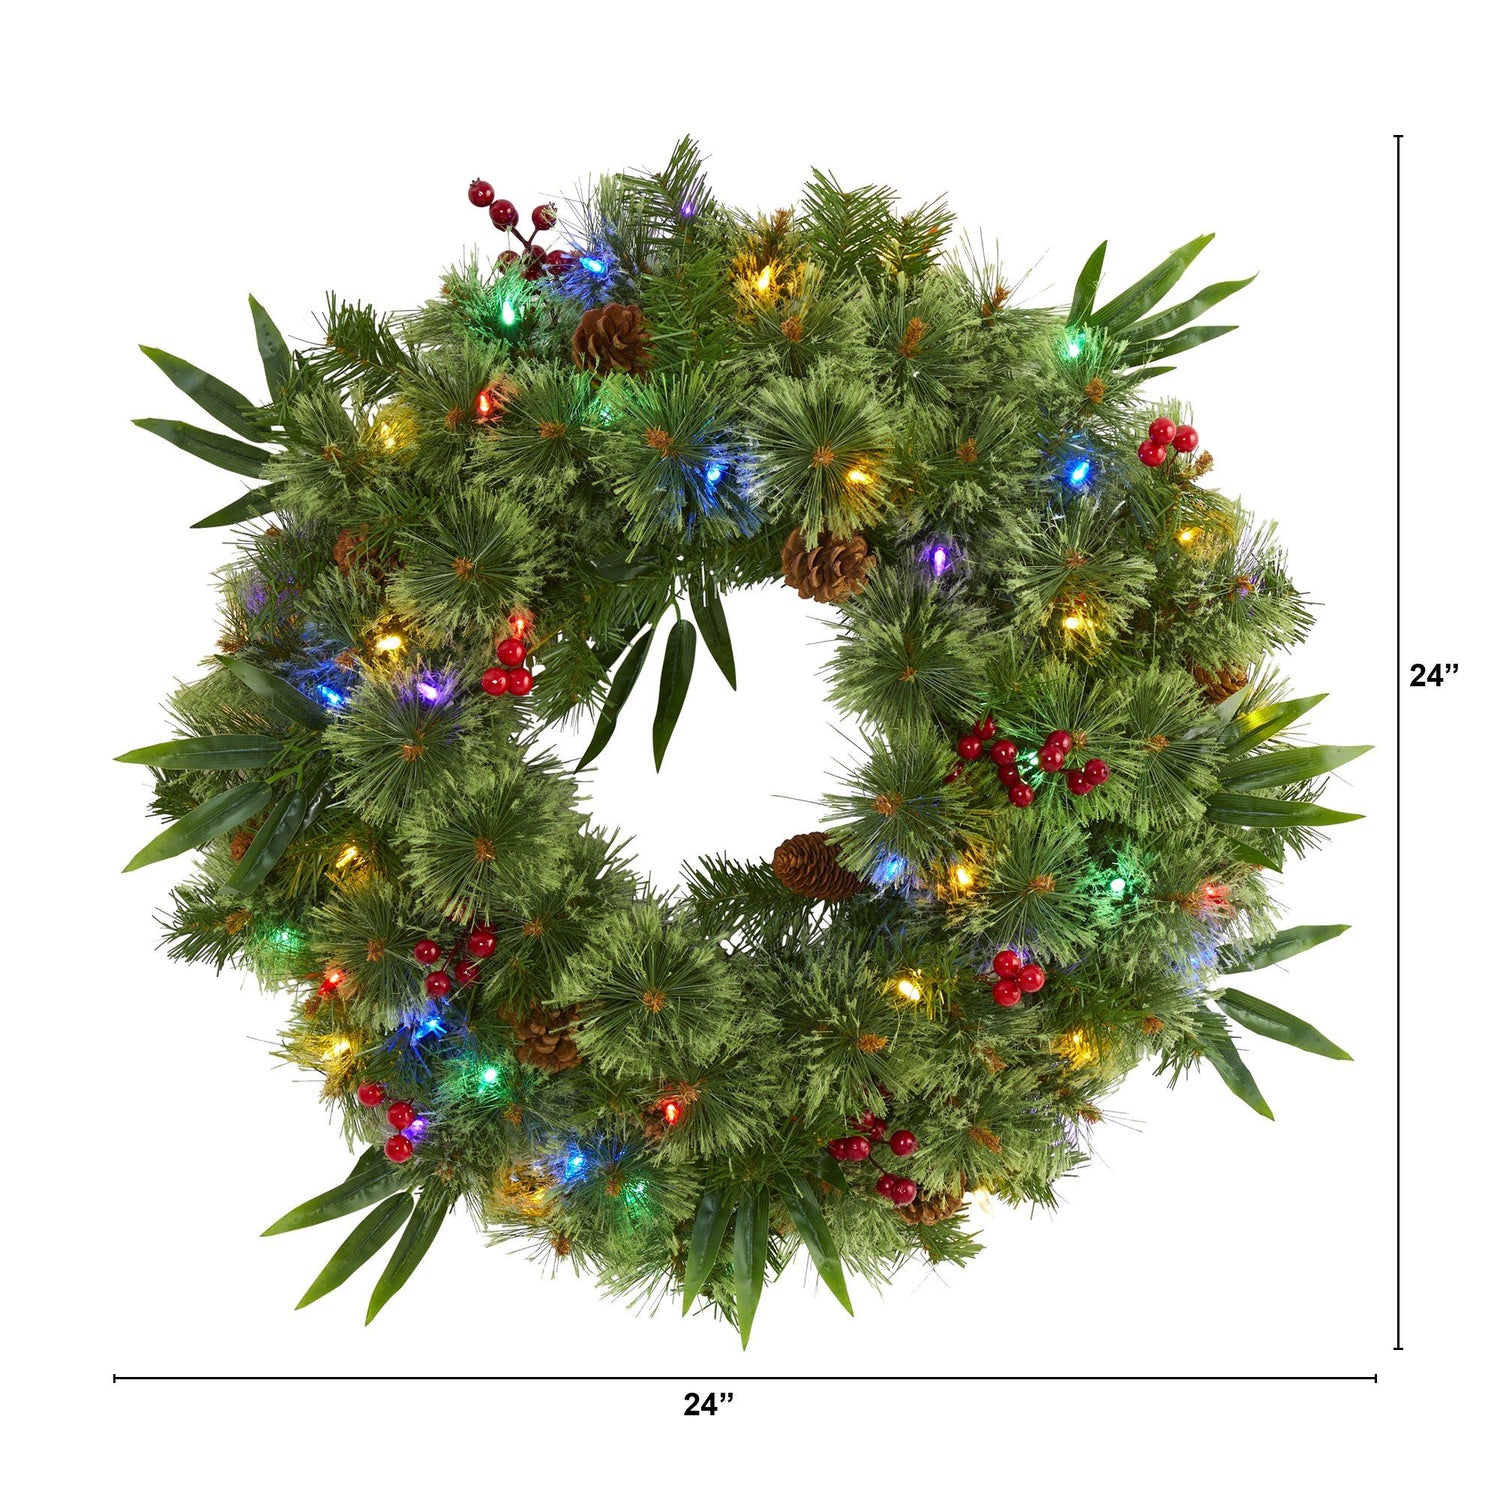 24” Mixed Pine Artificial Christmas Wreath with 50 Multicolored LED Lights, Berries and Pine Cones